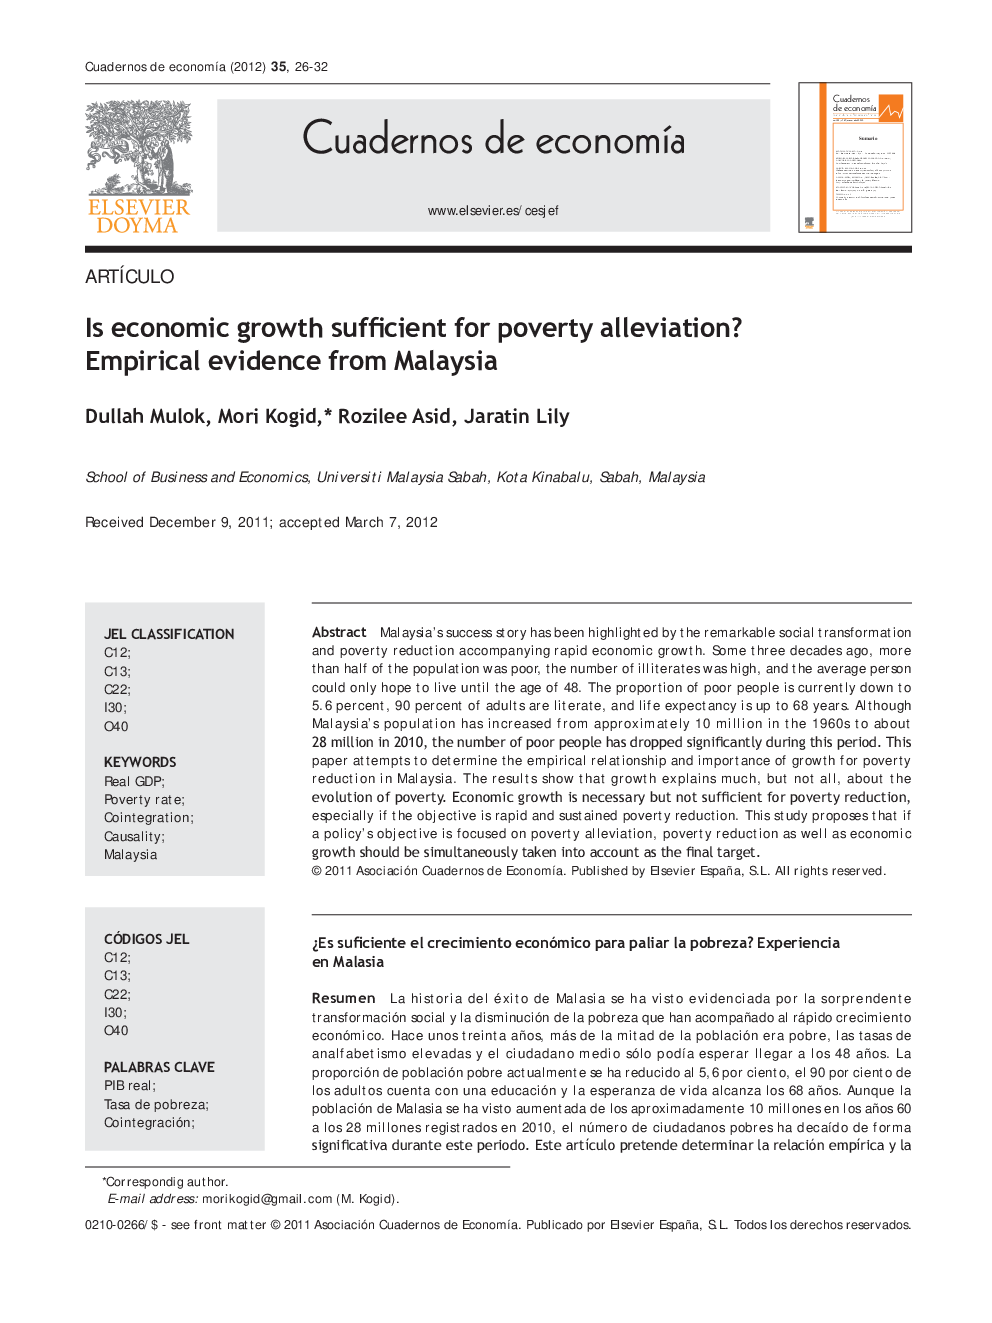 Is economic growth sufficient for poverty alleviation? Empirical evidence from Malaysia